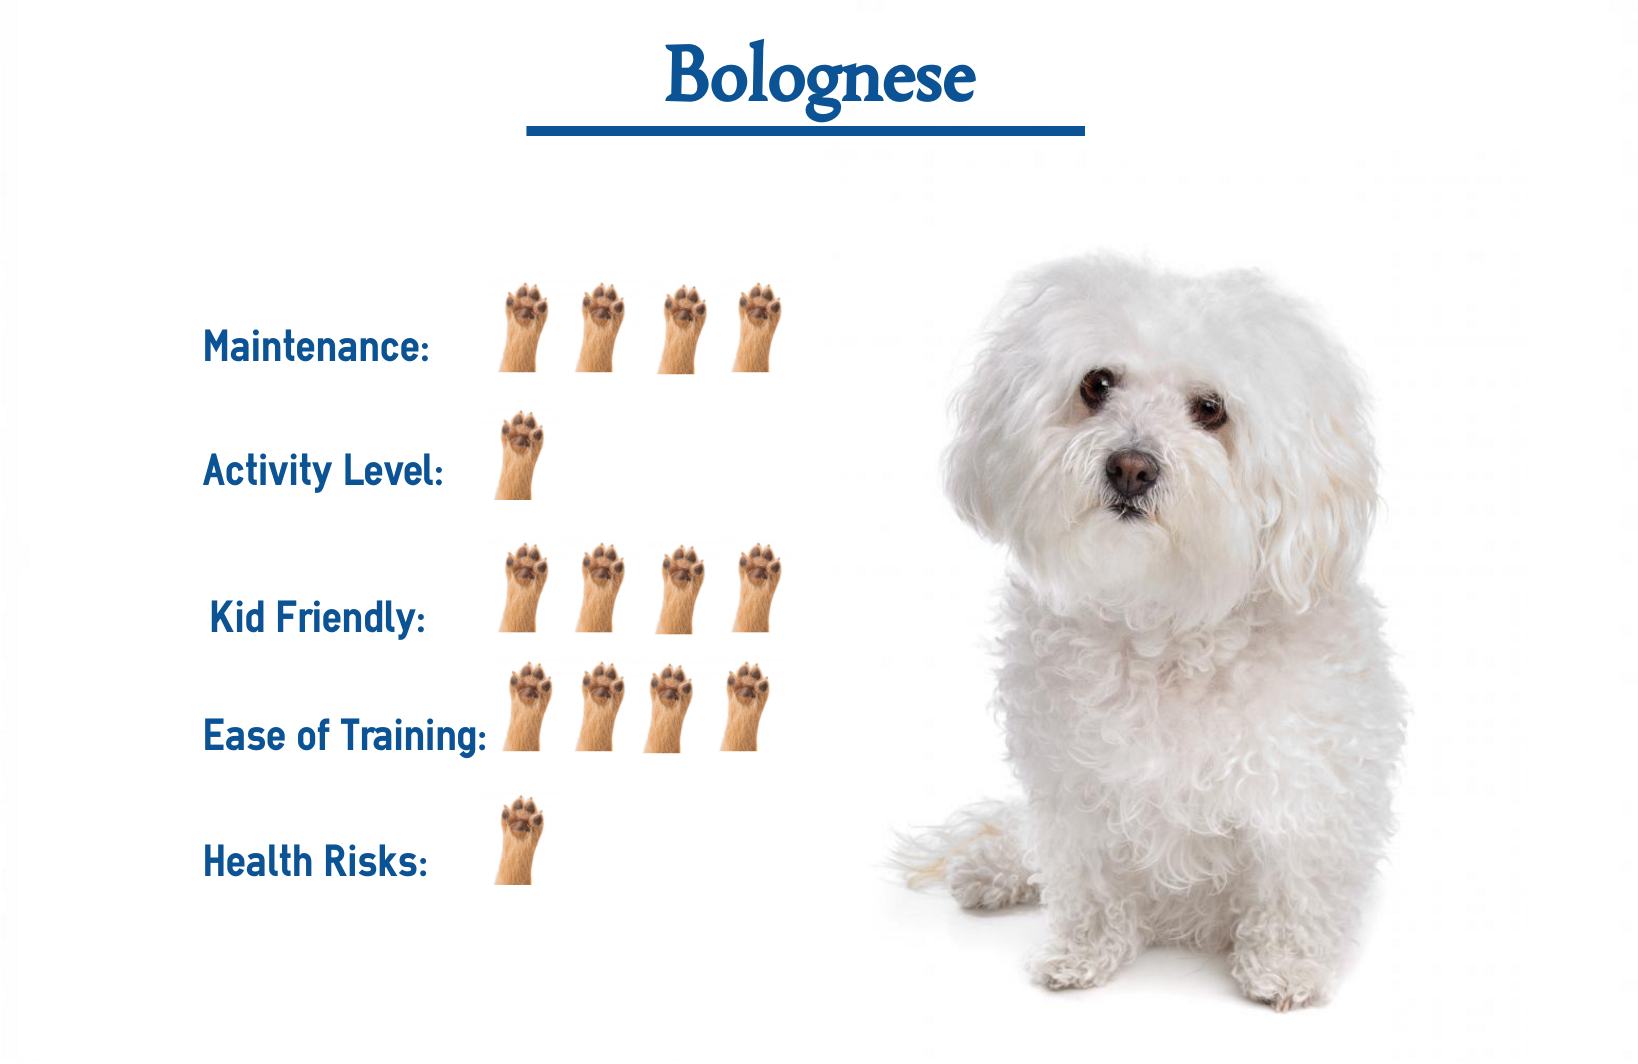 are bolognese dogs friendly